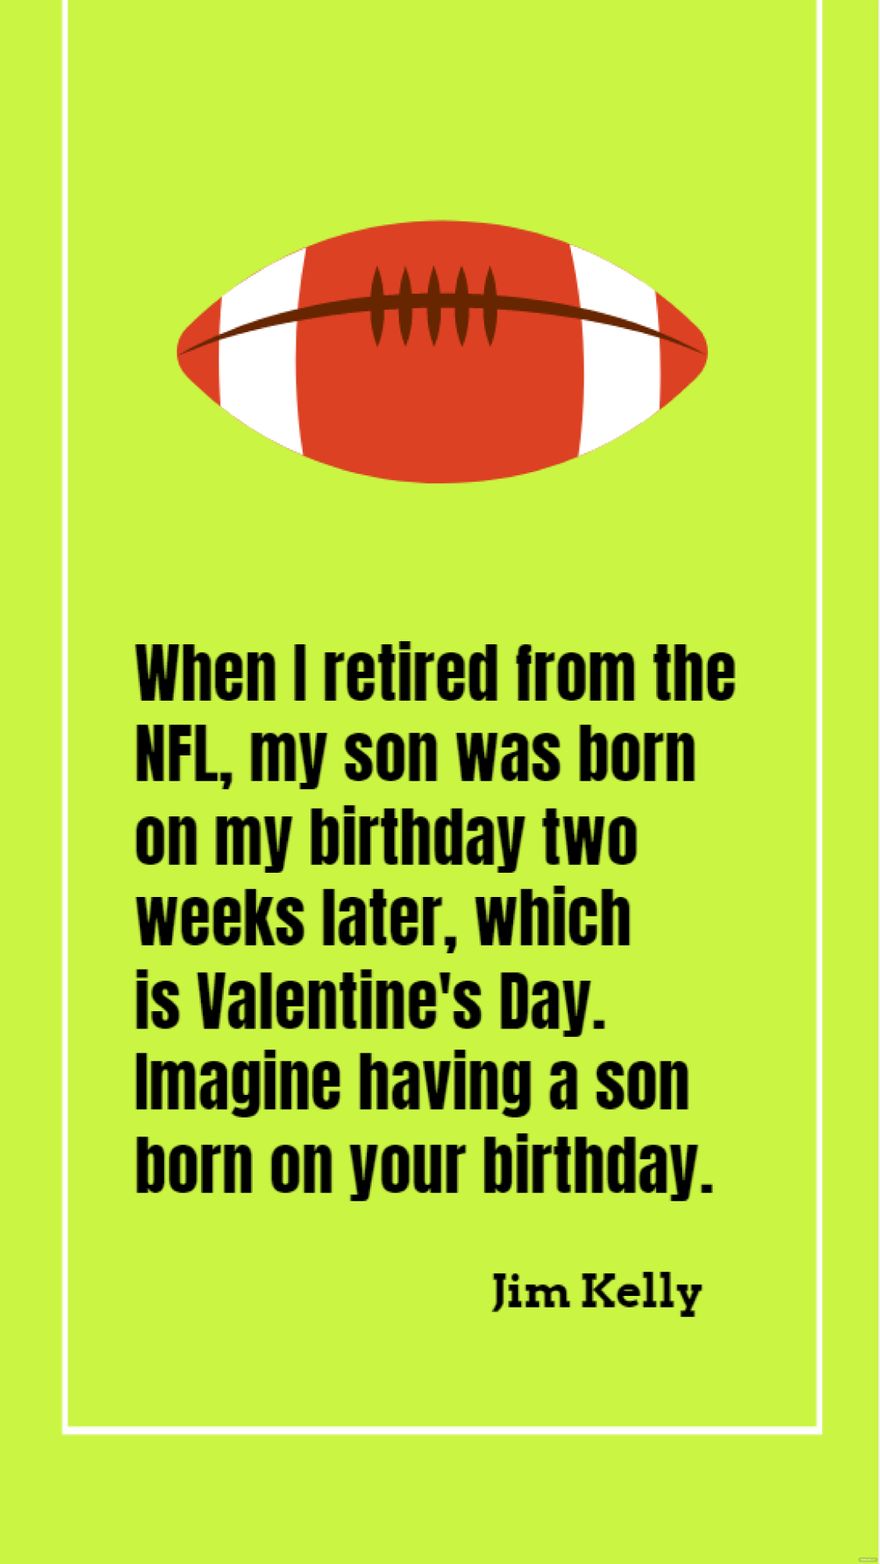 Jim Kelly - When I retired from the NFL, my son was born on my birthday two weeks later, which is Valentine's Day. Imagine having a son born on your birthday.